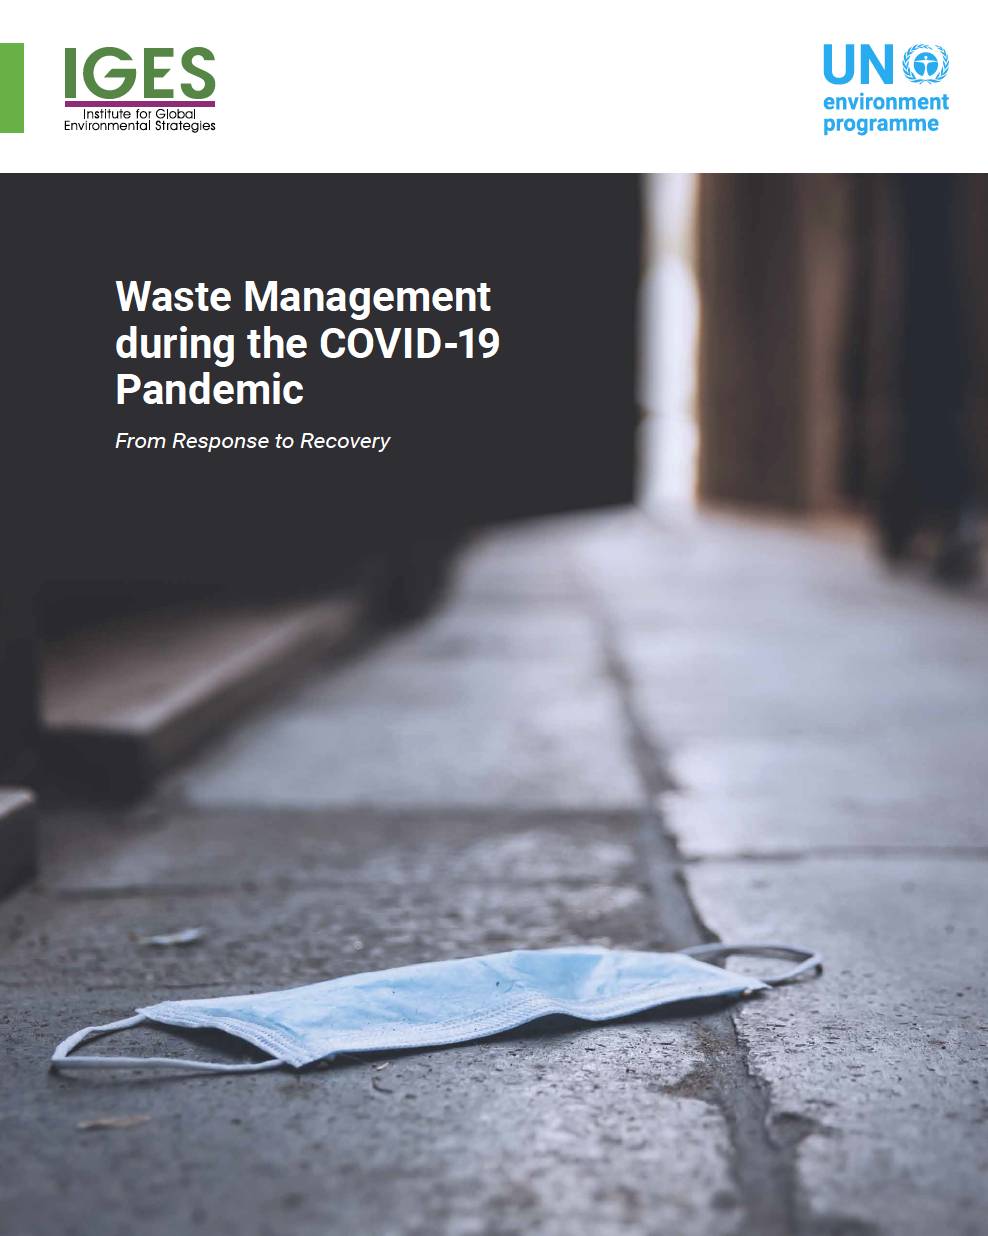 Waste Management during the COVID-19 Pandemic